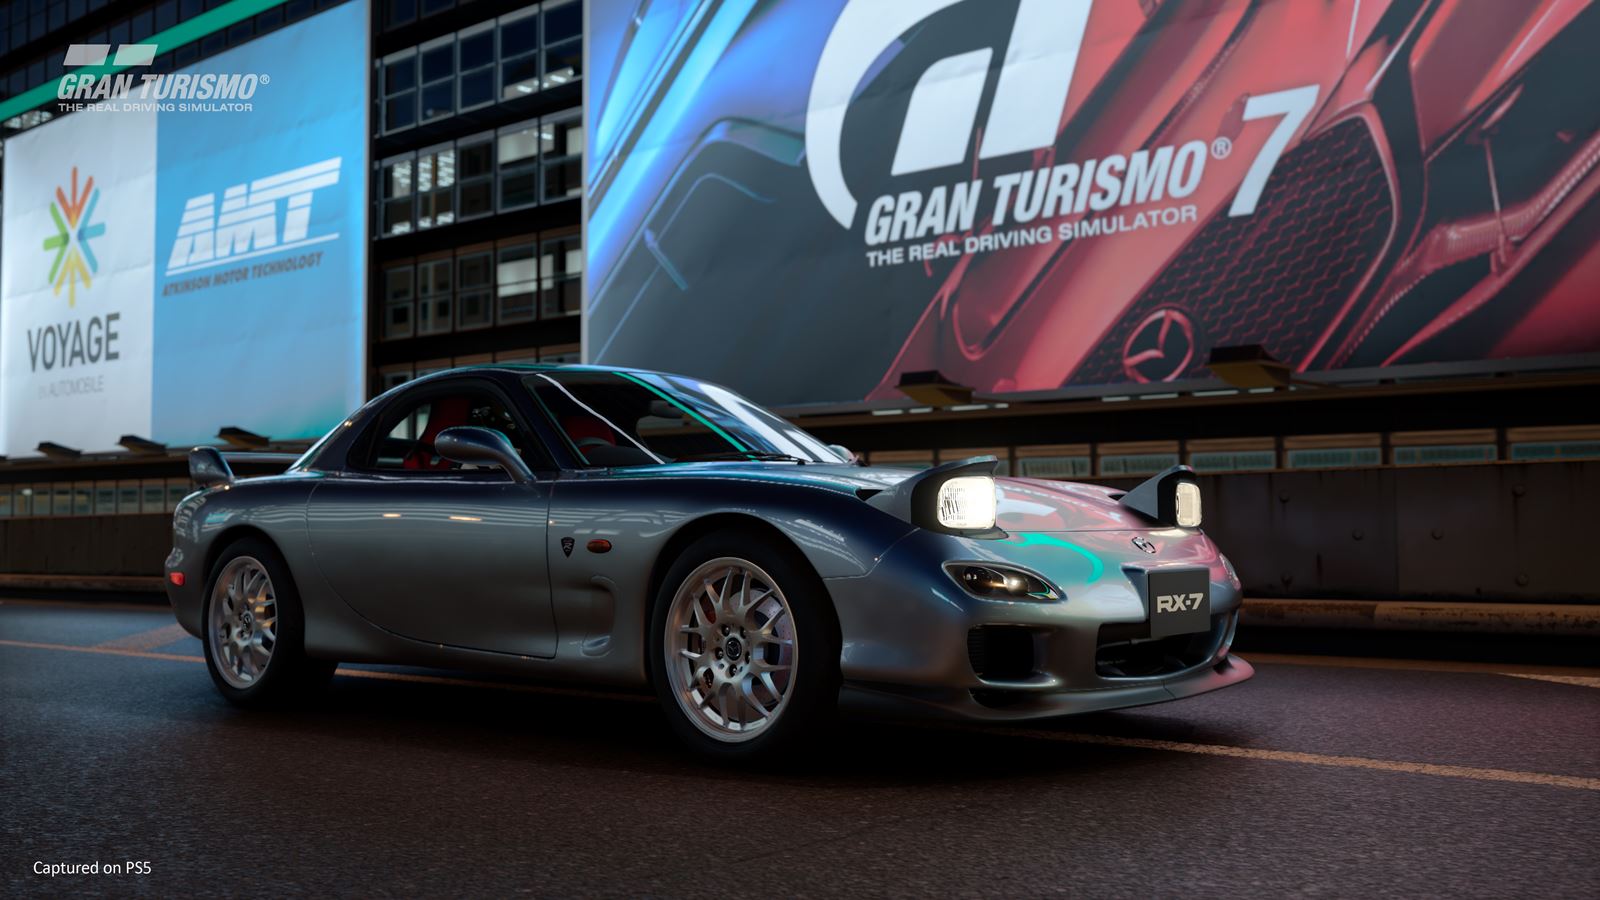 Gran Turismo 7 will be updated to add new features